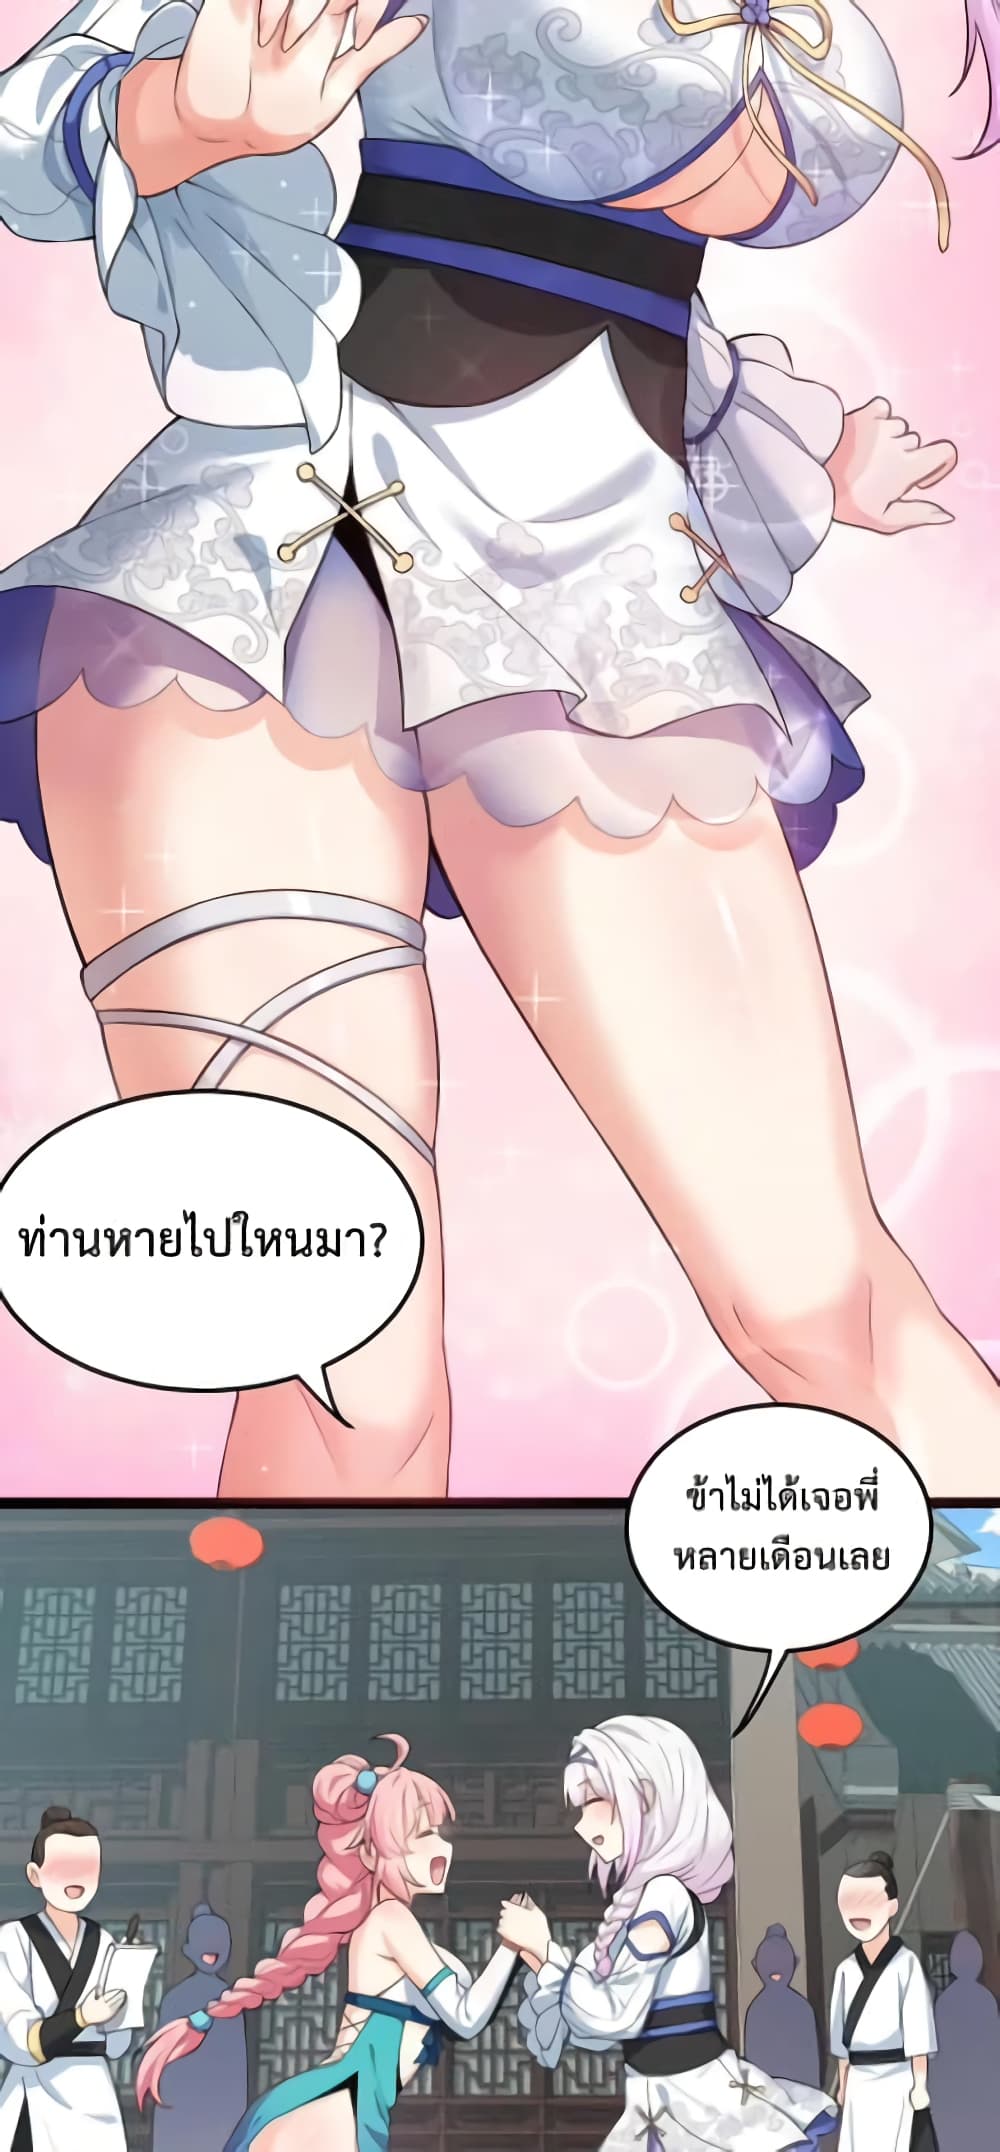 Godsian Masian from Another World ตอนที่ 97 (2)